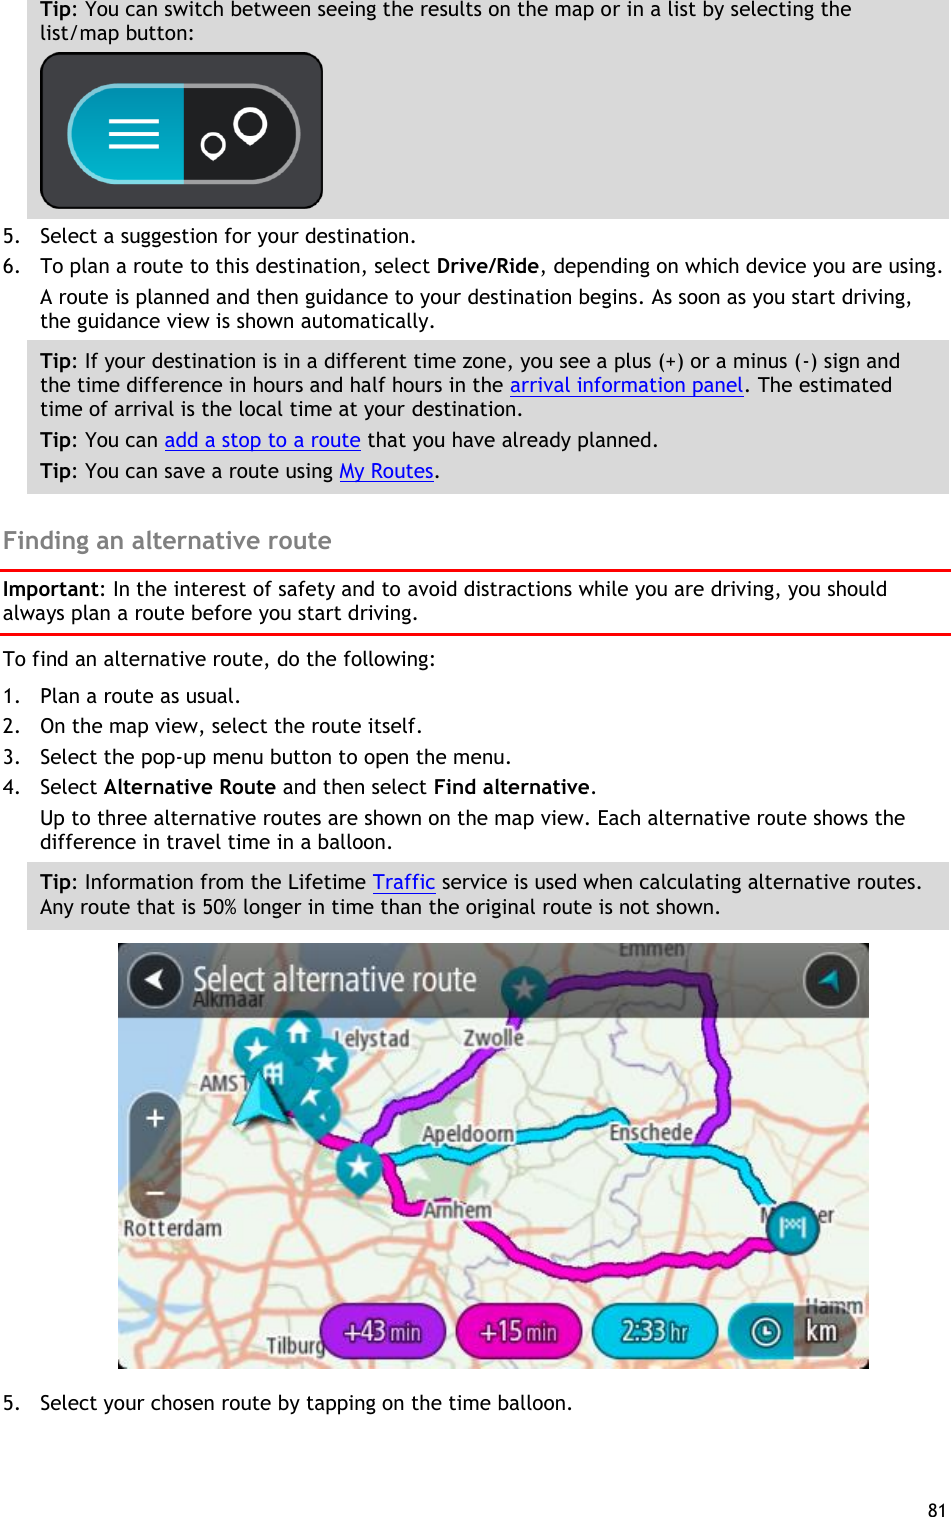  81  Tip: You can switch between seeing the results on the map or in a list by selecting the list/map button:    5. Select a suggestion for your destination. 6. To plan a route to this destination, select Drive/Ride, depending on which device you are using. A route is planned and then guidance to your destination begins. As soon as you start driving, the guidance view is shown automatically. Tip: If your destination is in a different time zone, you see a plus (+) or a minus (-) sign and the time difference in hours and half hours in the arrival information panel. The estimated time of arrival is the local time at your destination. Tip: You can add a stop to a route that you have already planned. Tip: You can save a route using My Routes.  Finding an alternative route Important: In the interest of safety and to avoid distractions while you are driving, you should always plan a route before you start driving. To find an alternative route, do the following:   1. Plan a route as usual. 2. On the map view, select the route itself. 3. Select the pop-up menu button to open the menu. 4. Select Alternative Route and then select Find alternative. Up to three alternative routes are shown on the map view. Each alternative route shows the difference in travel time in a balloon. Tip: Information from the Lifetime Traffic service is used when calculating alternative routes. Any route that is 50% longer in time than the original route is not shown.  5. Select your chosen route by tapping on the time balloon. 